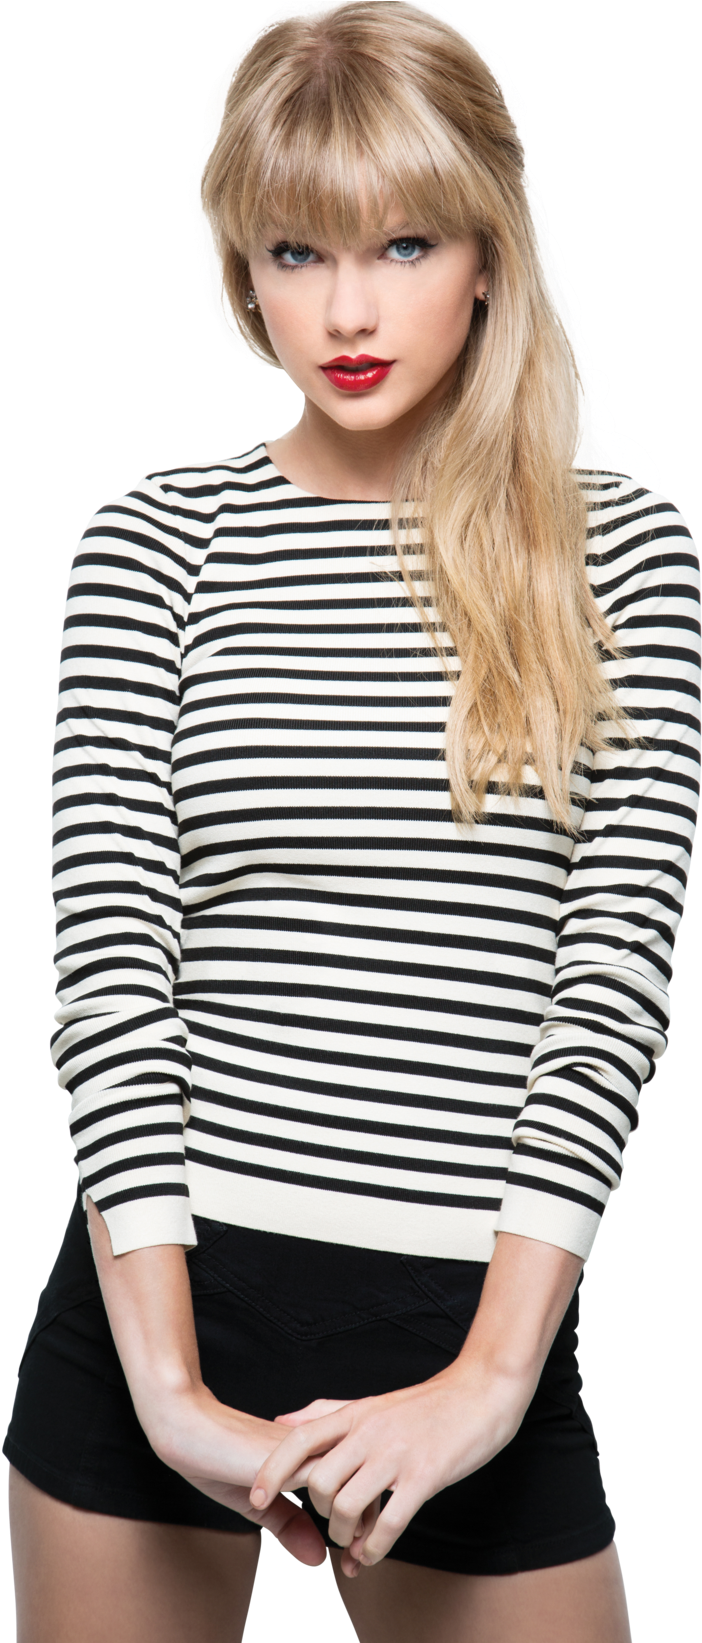 Taylor Swift Png Transparent Images - Taylor Swift Pose (1024x1642)